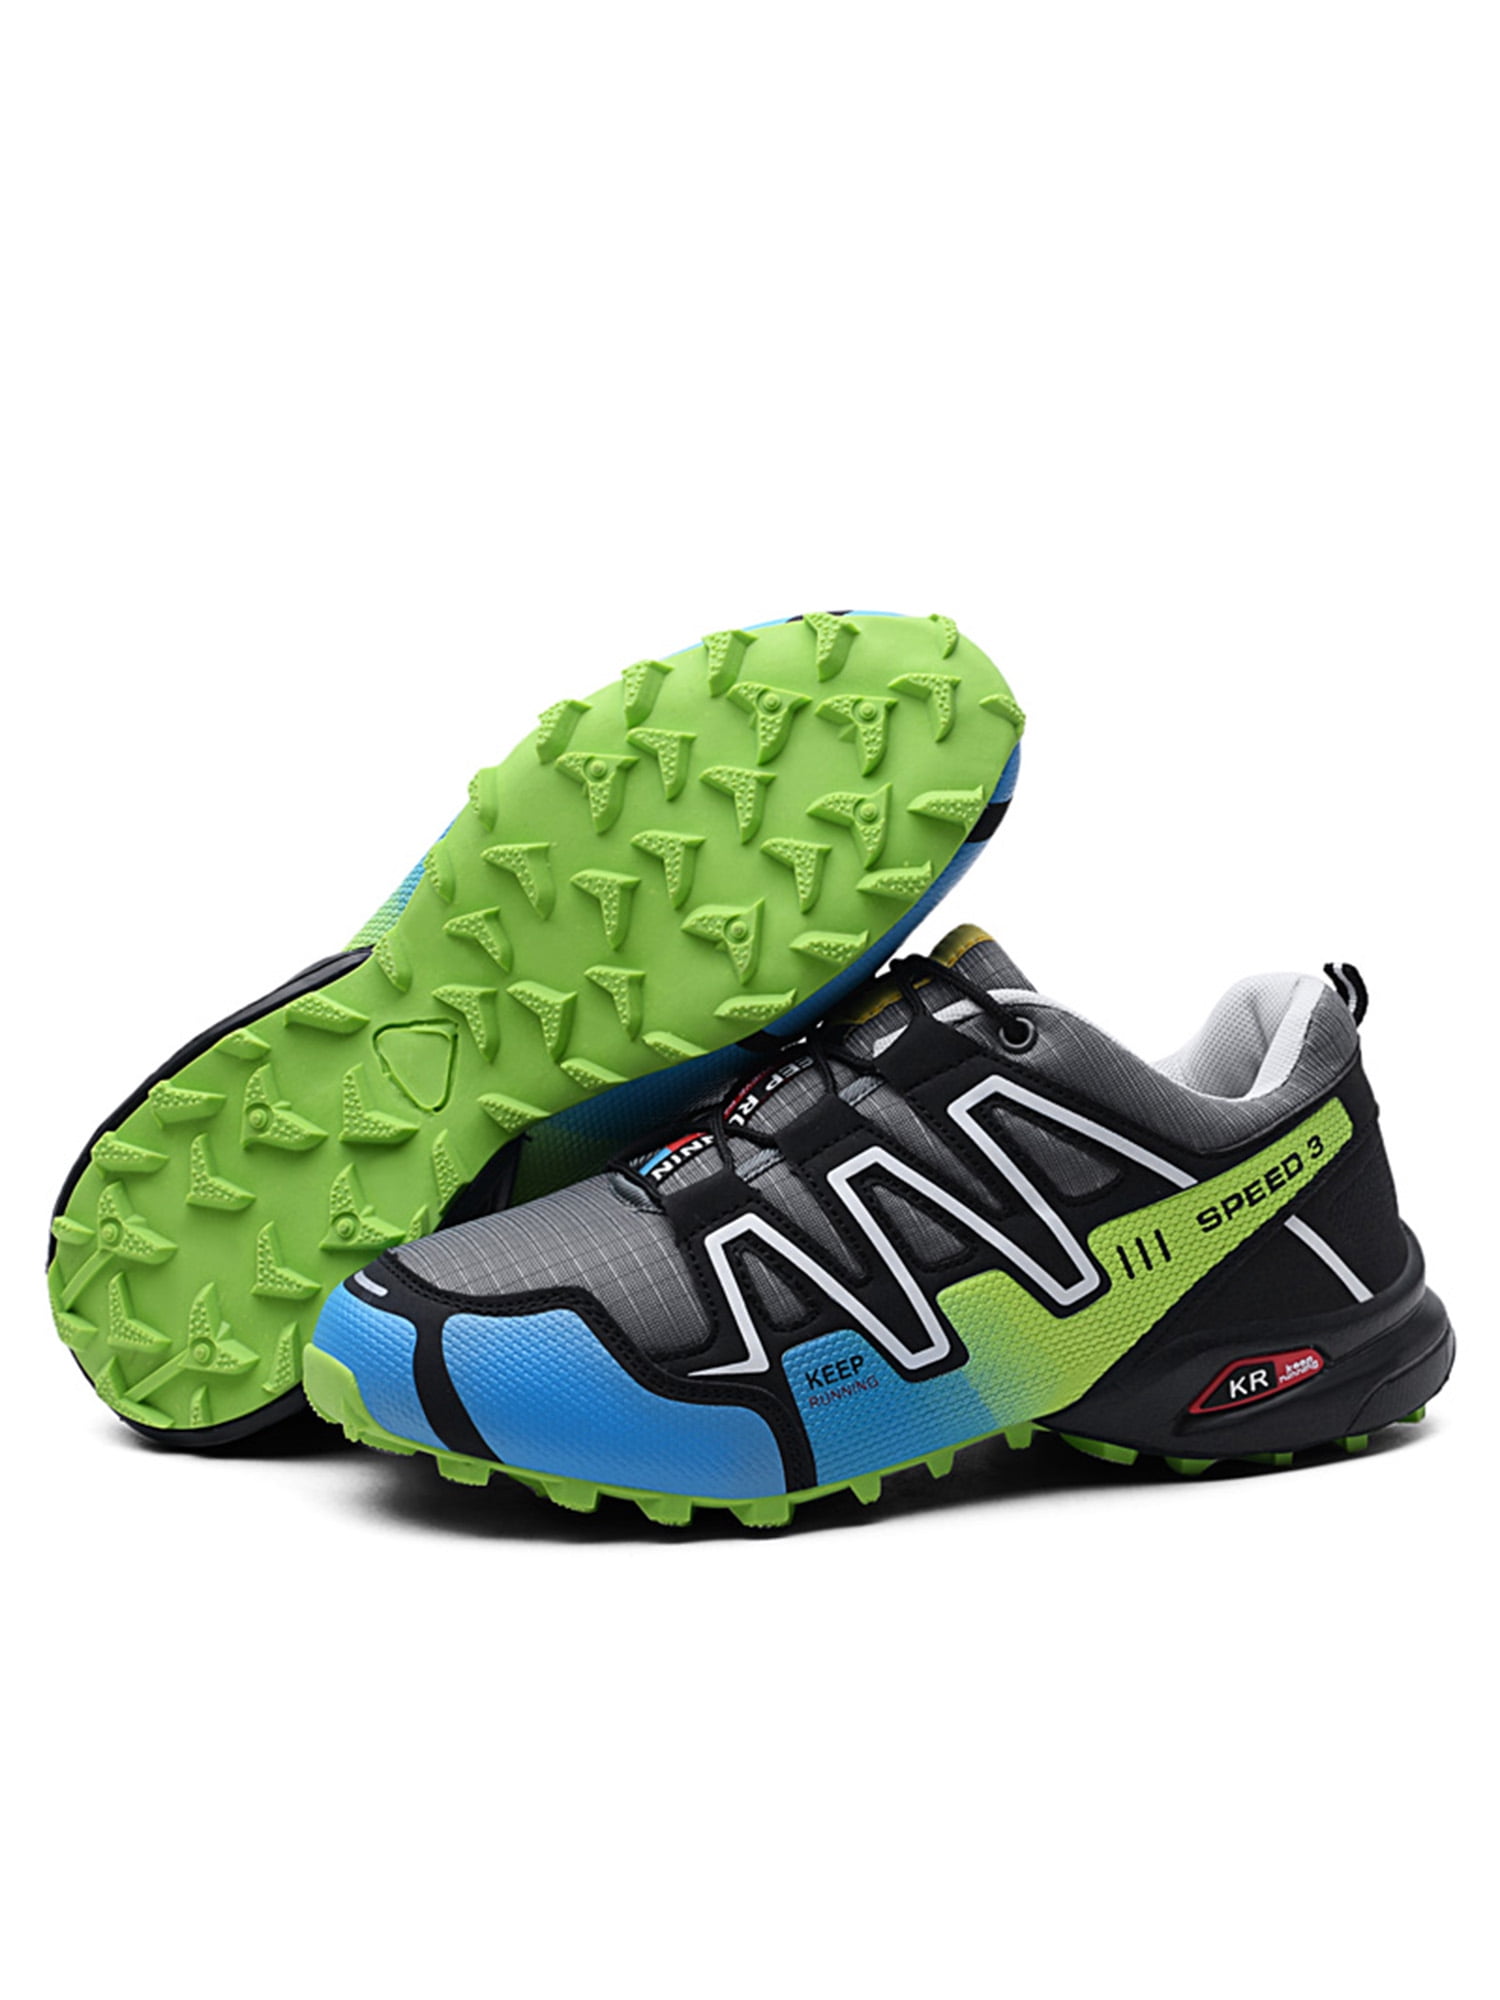 Men's Running Shoes Casual Outdoor Sports Breathable Sneakers Shoes Athletic Ins 